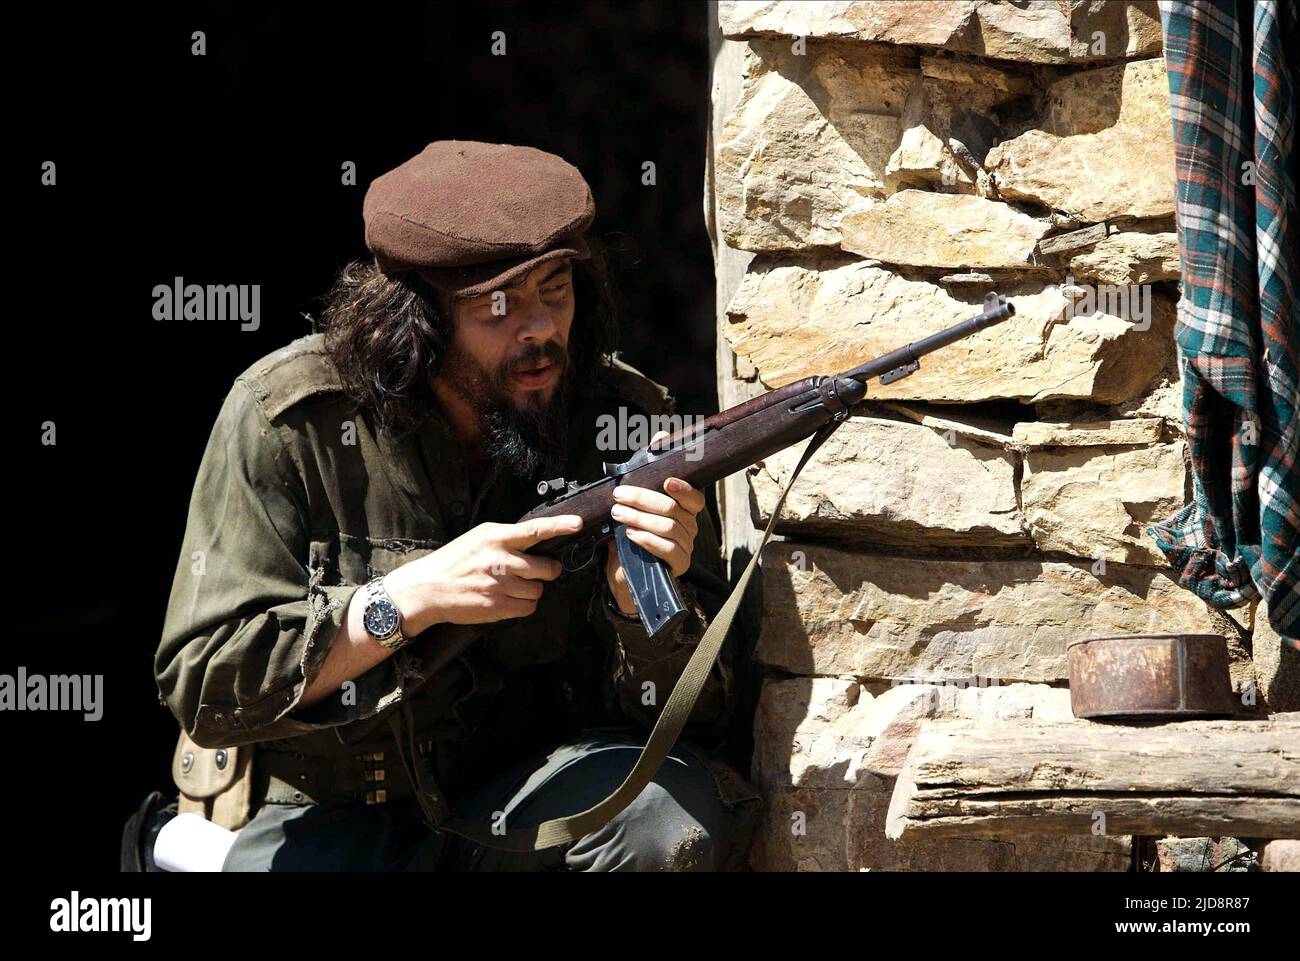 A beret, uniform and pistol used by Ernesto Che Guevara is seen